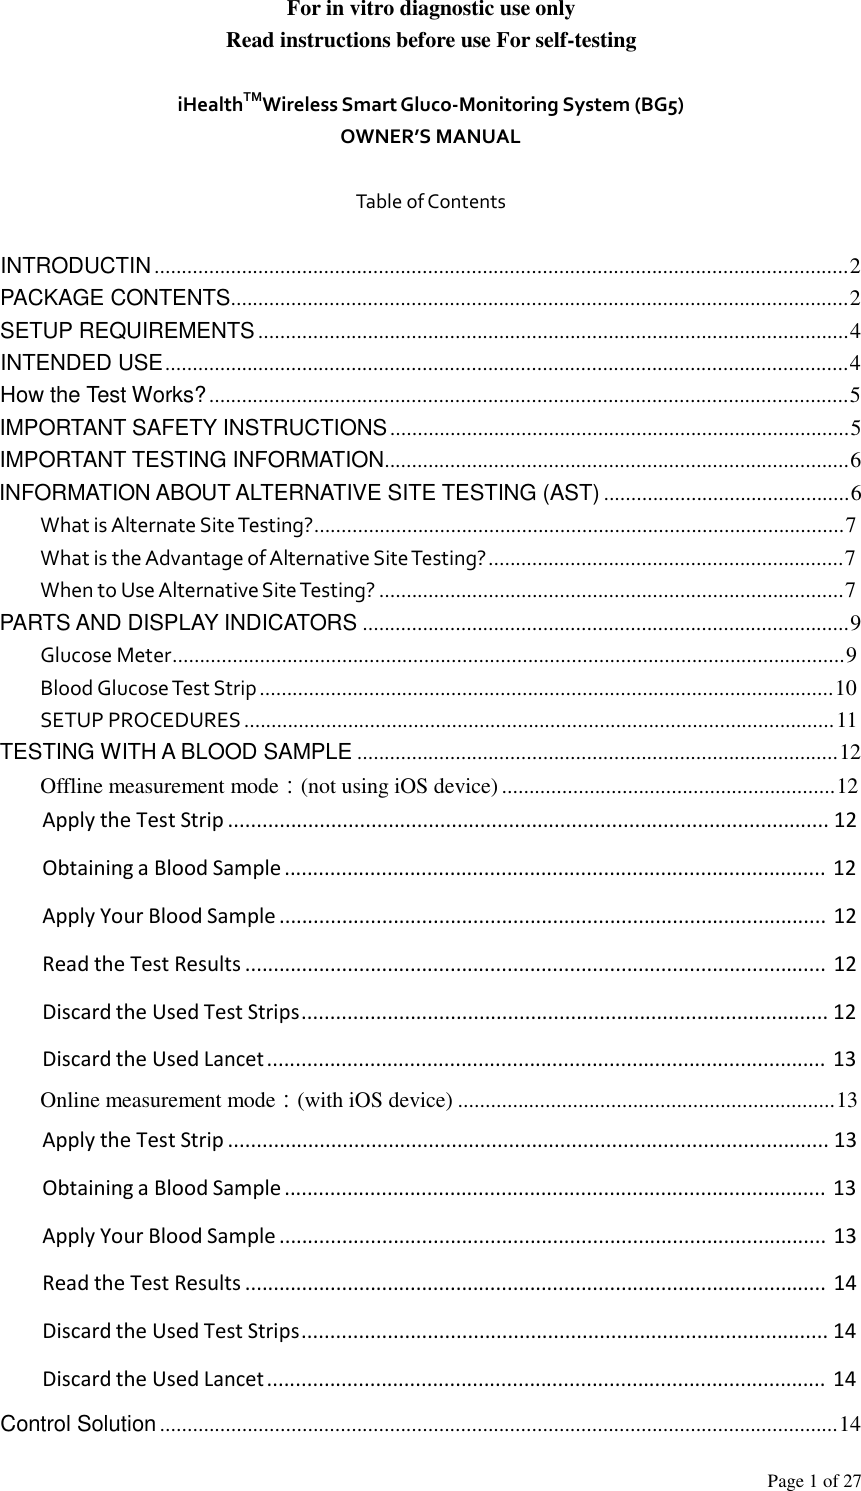 Page 1 of 27  For in vitro diagnostic use only Read instructions before use For self-testing   iHealthTMWireless Smart Gluco‐Monitoring System (BG5) OWNER’S MANUAL   Table of Contents   INTRODUCTIN ...............................................................................................................................2 PACKAGE CONTENTS.................................................................................................................2 SETUP REQUIREMENTS ............................................................................................................4 INTENDED USE .............................................................................................................................4 How the Test Works? .....................................................................................................................5 IMPORTANT SAFETY INSTRUCTIONS ....................................................................................5 IMPORTANT TESTING INFORMATION.....................................................................................6 INFORMATION ABOUT ALTERNATIVE SITE TESTING (AST) .............................................6 What is Alternate Site Testing?.................................................................................................7 What is the Advantage of Alternative Site Testing? .................................................................7 When to Use Alternative Site Testing? .....................................................................................7 PARTS AND DISPLAY INDICATORS .........................................................................................9 Glucose Meter...........................................................................................................................9 Blood Glucose Test Strip .........................................................................................................10 SETUP PROCEDURES ............................................................................................................ 11 TESTING WITH A BLOOD SAMPLE ........................................................................................12 Offline measurement mode：(not using iOS device) .............................................................12 Apply the Test Strip ......................................................................................................... 12  Obtaining a Blood Sample ............................................................................................... 12  Apply Your Blood Sample ................................................................................................ 12  Read the Test Results ......................................................................................................  12  Discard the Used Test Strips ............................................................................................ 12  Discard the Used Lancet .................................................................................................. 13 Online measurement mode：(with iOS device) .....................................................................13 Apply the Test Strip ......................................................................................................... 13  Obtaining a Blood Sample ............................................................................................... 13  Apply Your Blood Sample ................................................................................................ 13  Read the Test Results ......................................................................................................  14  Discard the Used Test Strips ............................................................................................ 14  Discard the Used Lancet .................................................................................................. 14  Control Solution ............................................................................................................................14 